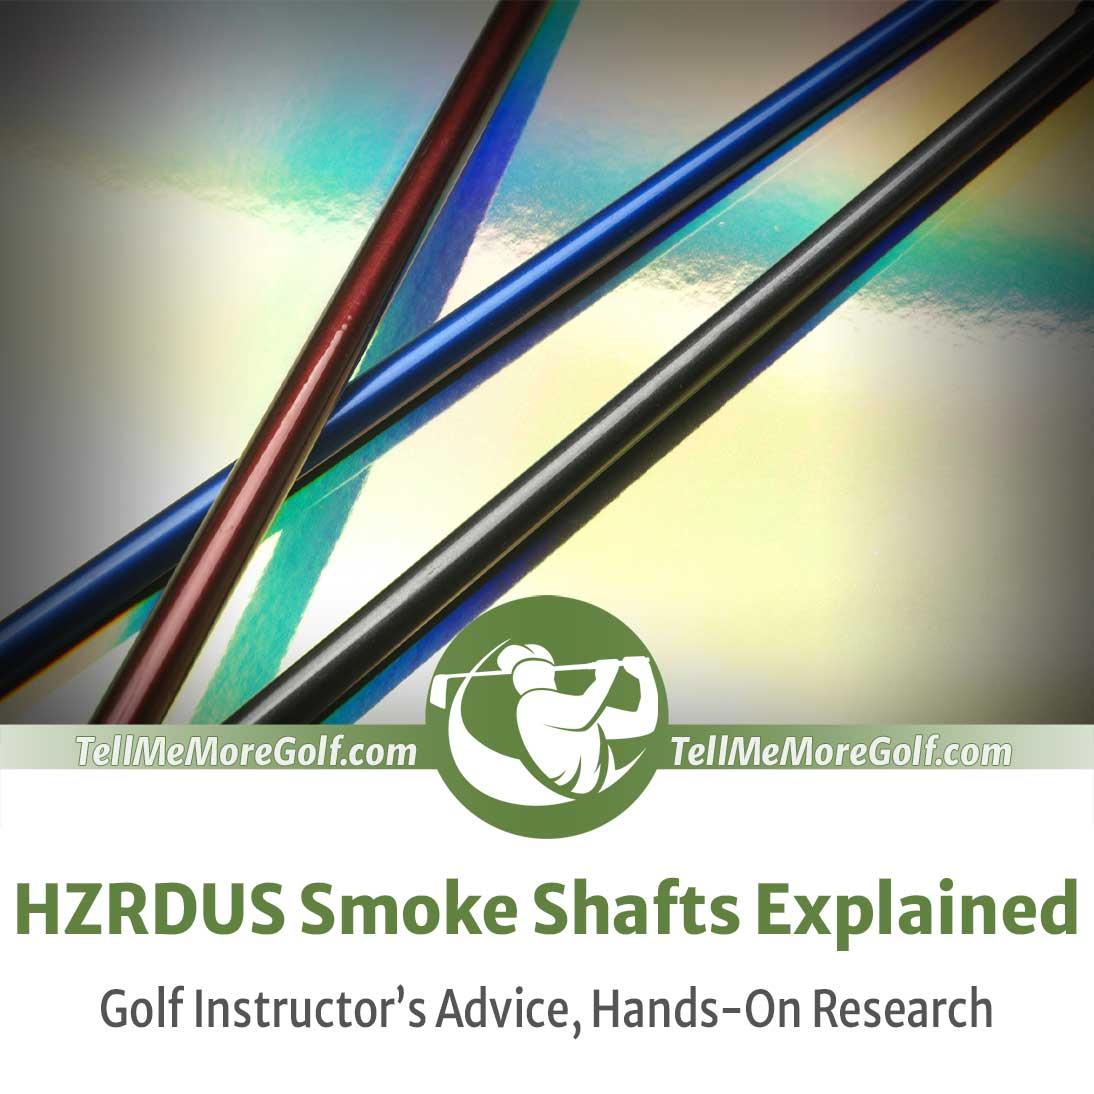 HZRDUS Smoke Shafts Explained Including the Hzrdus Smoke Shaft Differences from Our Professional Golf Coaches Advice